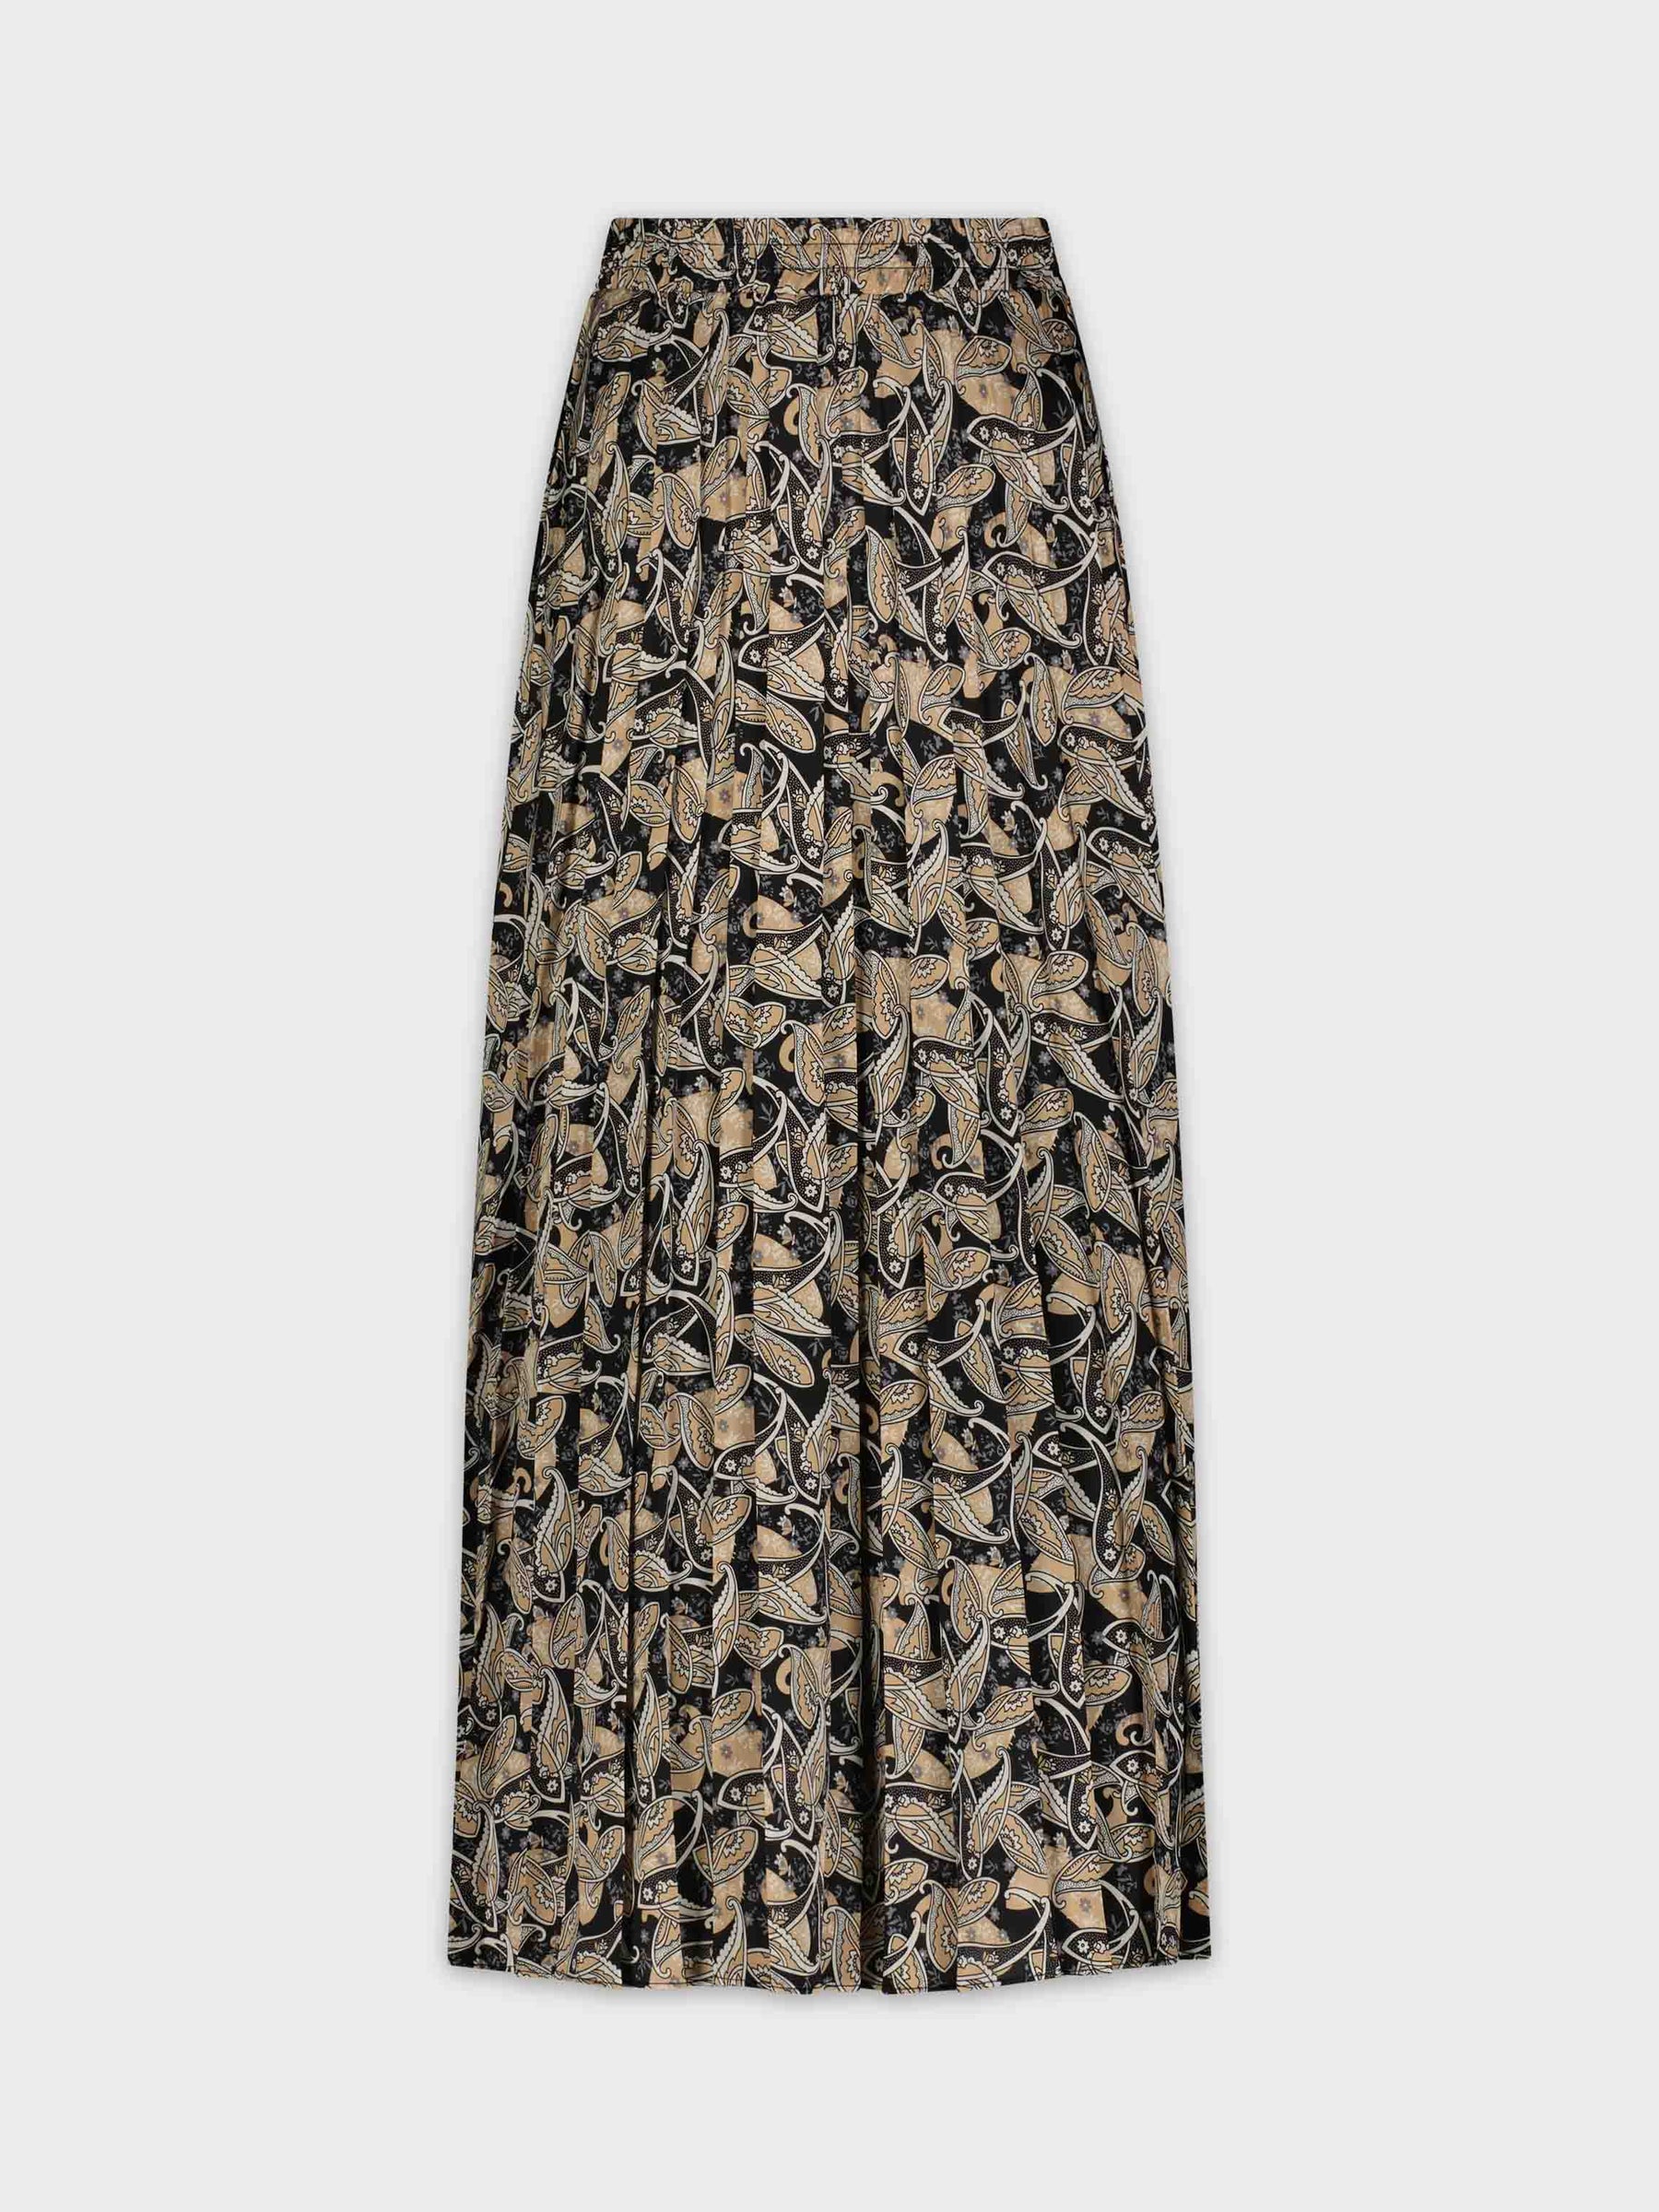 COVERED BAND PLEATED SKIRT 35"-GOLD LEAF